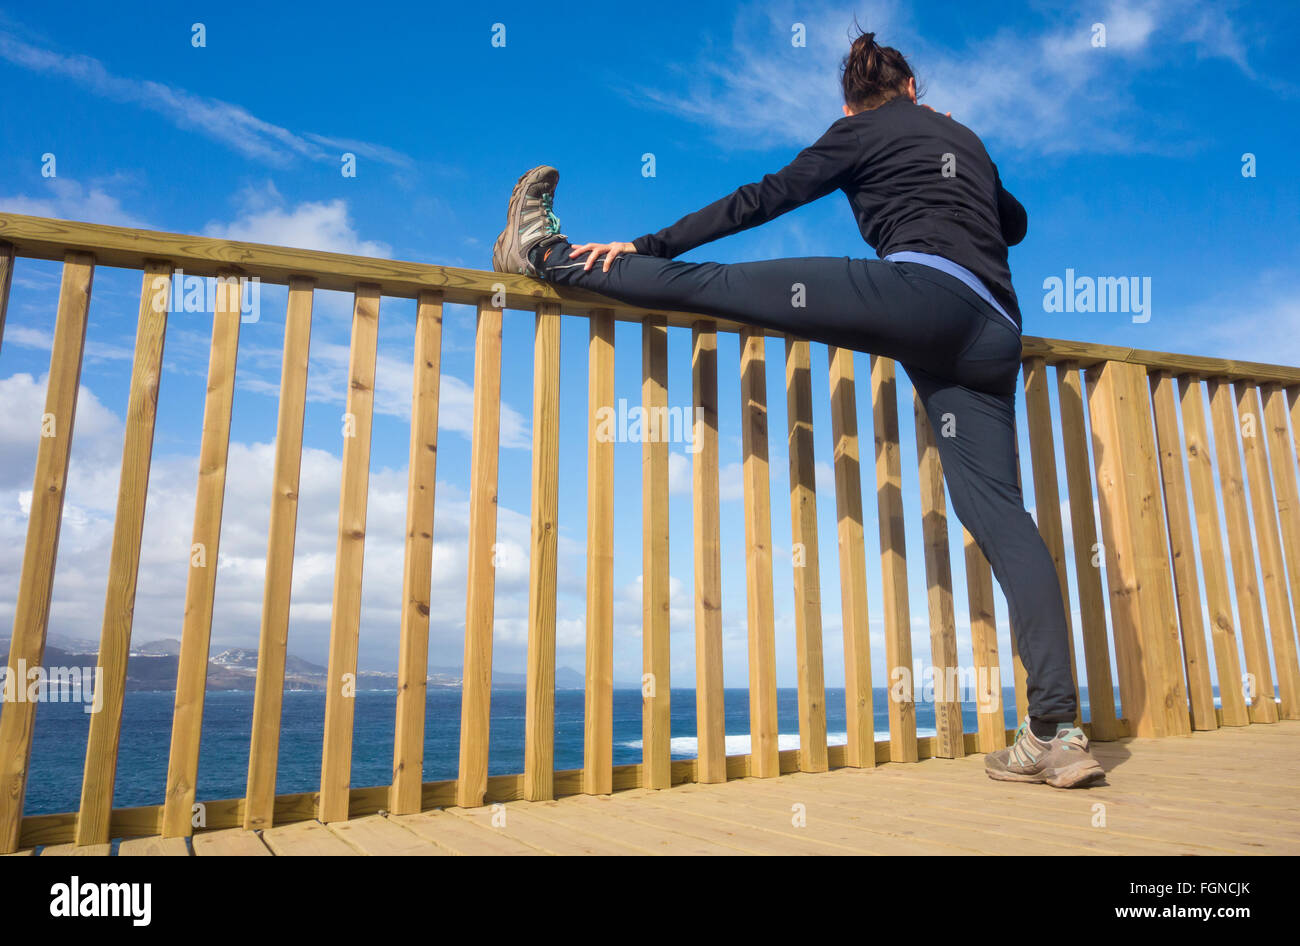 low angle view blue sky training injury prevention preventing 'warming up' exercise exercising runner flexible flexibility Stock Photo